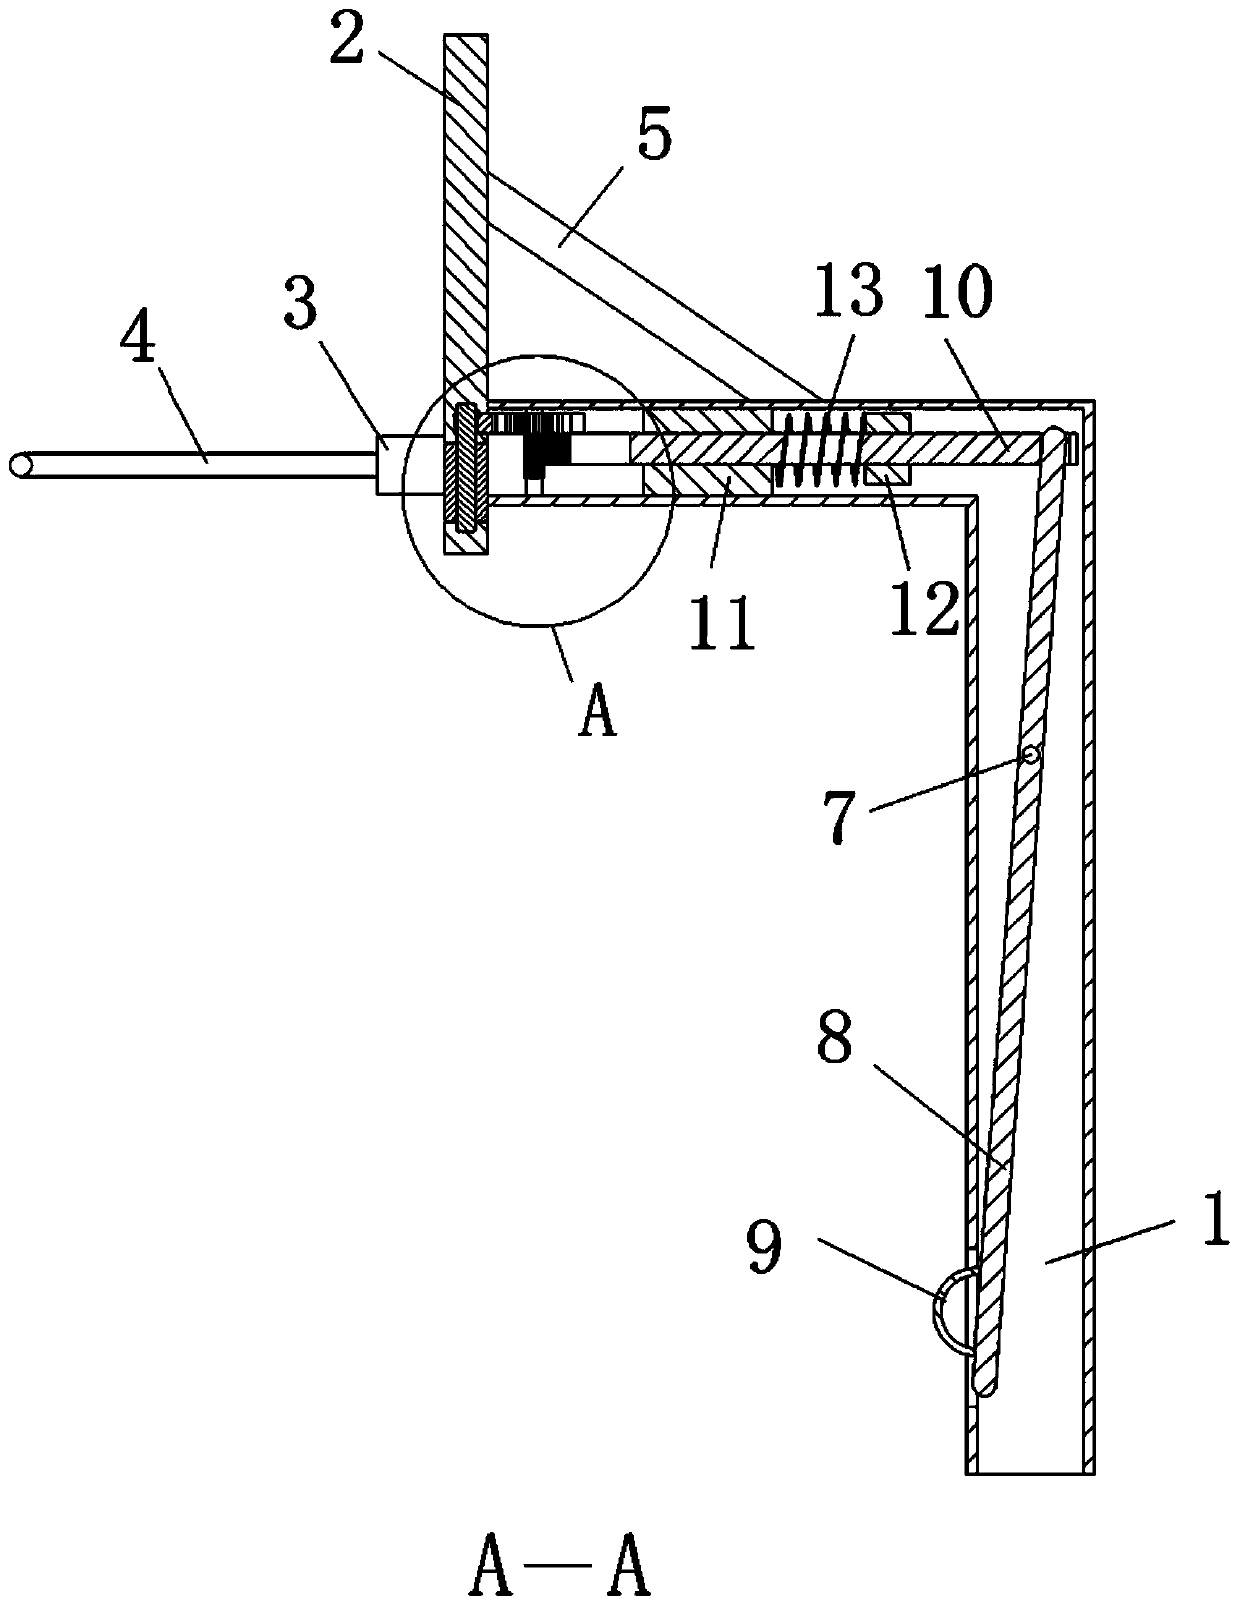 A flip-type basketball stand for conveniently taking out stuck balls and its use method